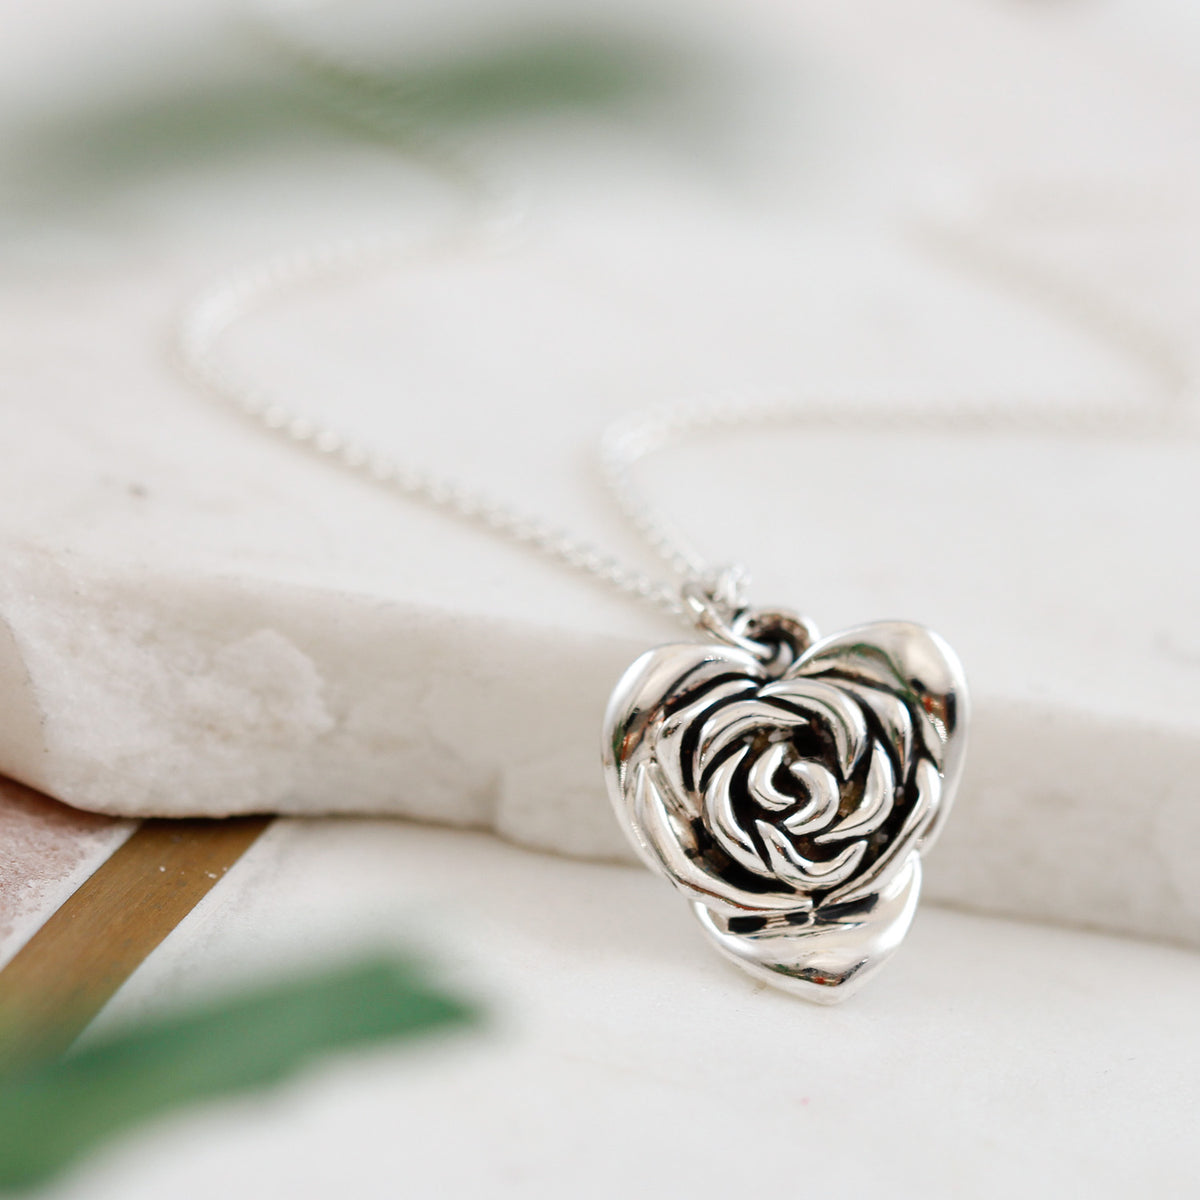 heart shaped rose flower necklace silver floral pendant